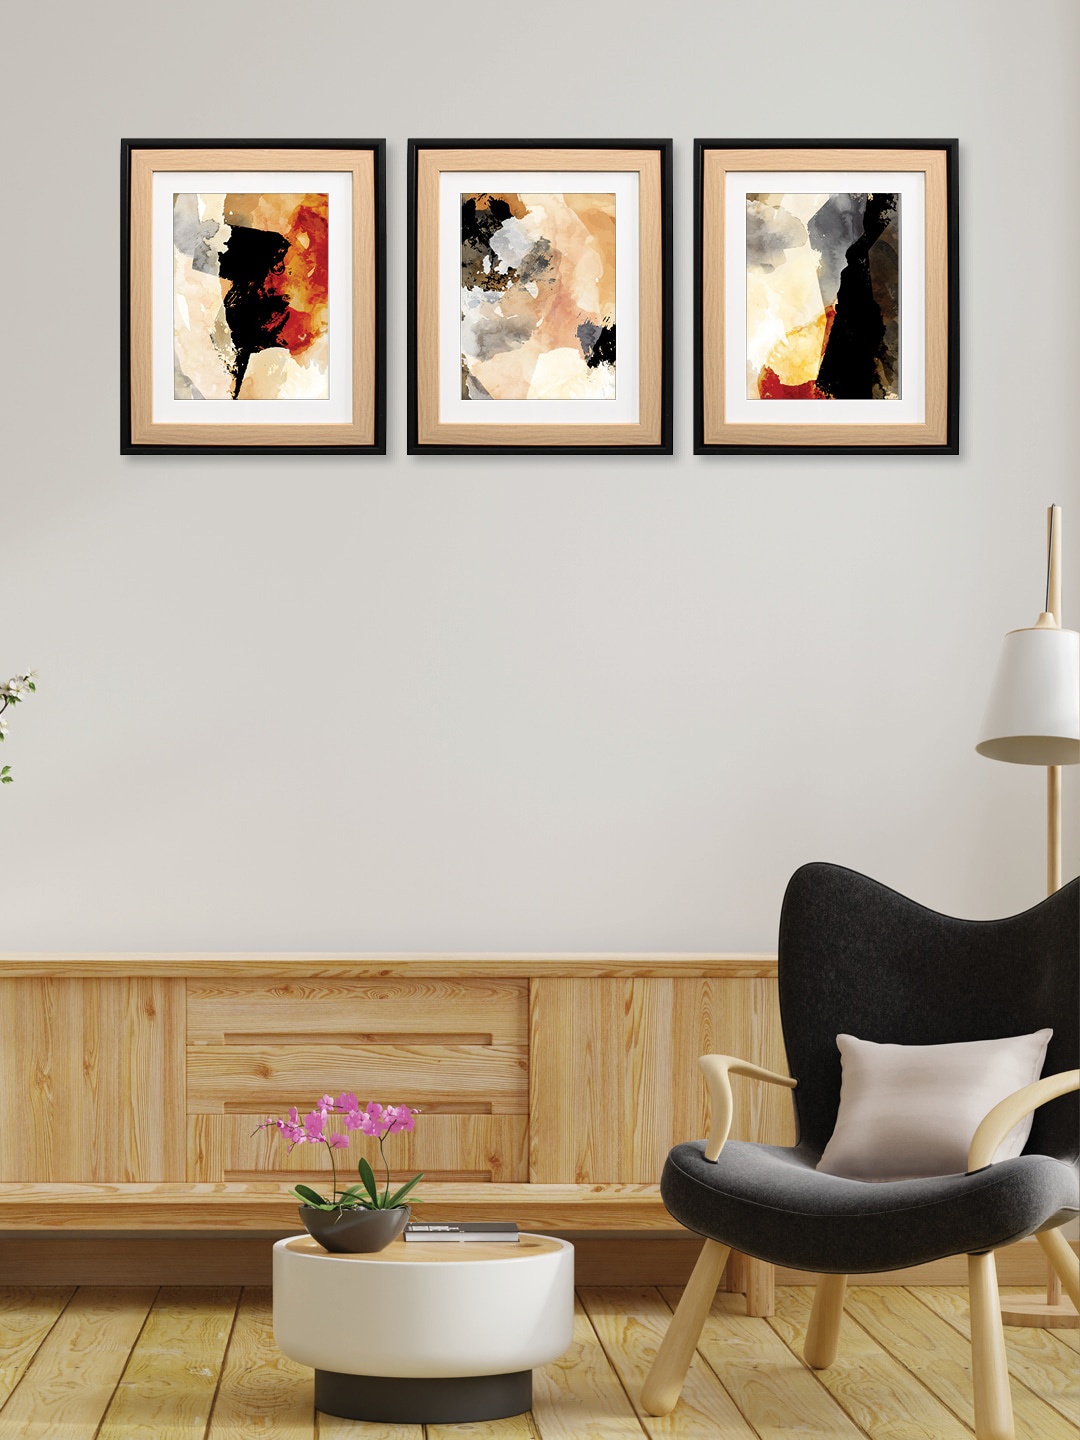 

RANDOM Beige & Black 3 Pieces Abstract Wooden Painted Wall Arts